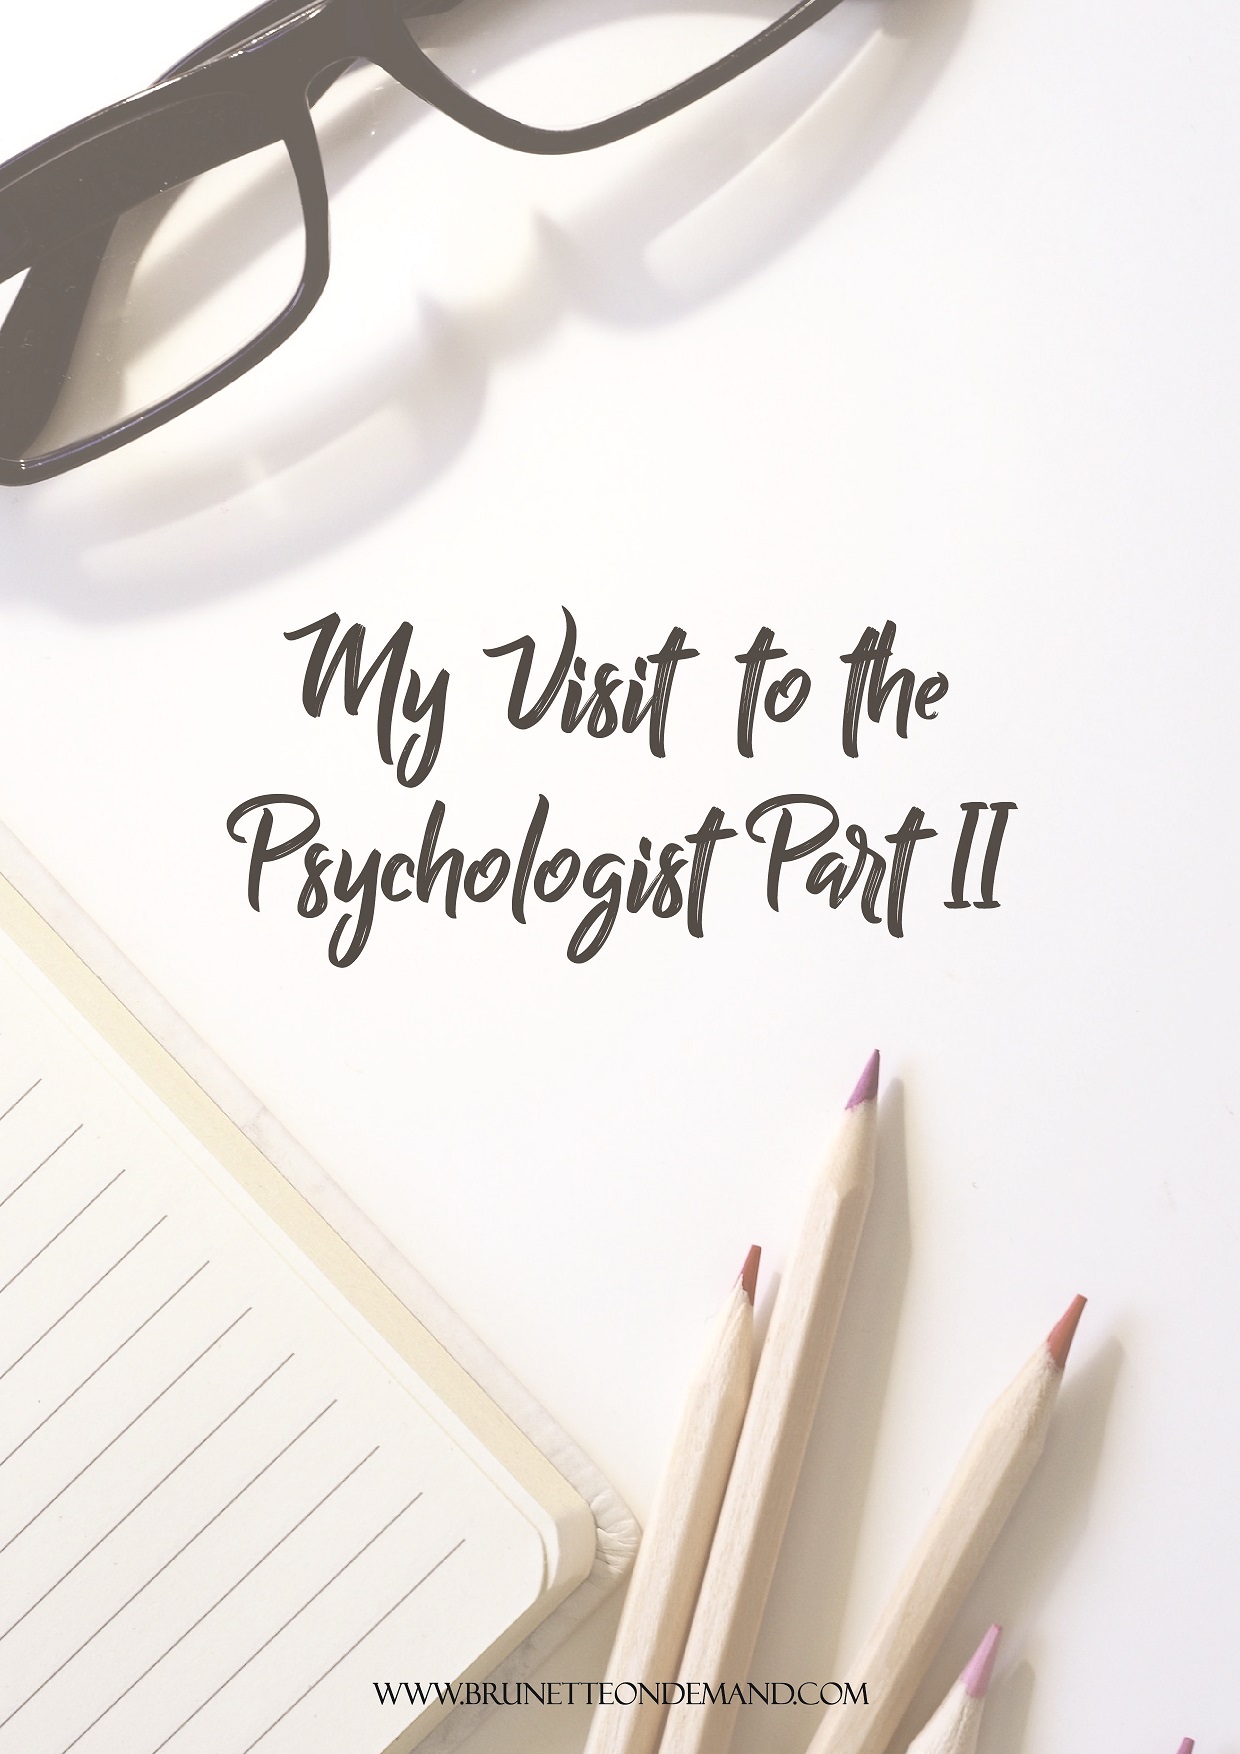 My Visit To The Psychologist Part II